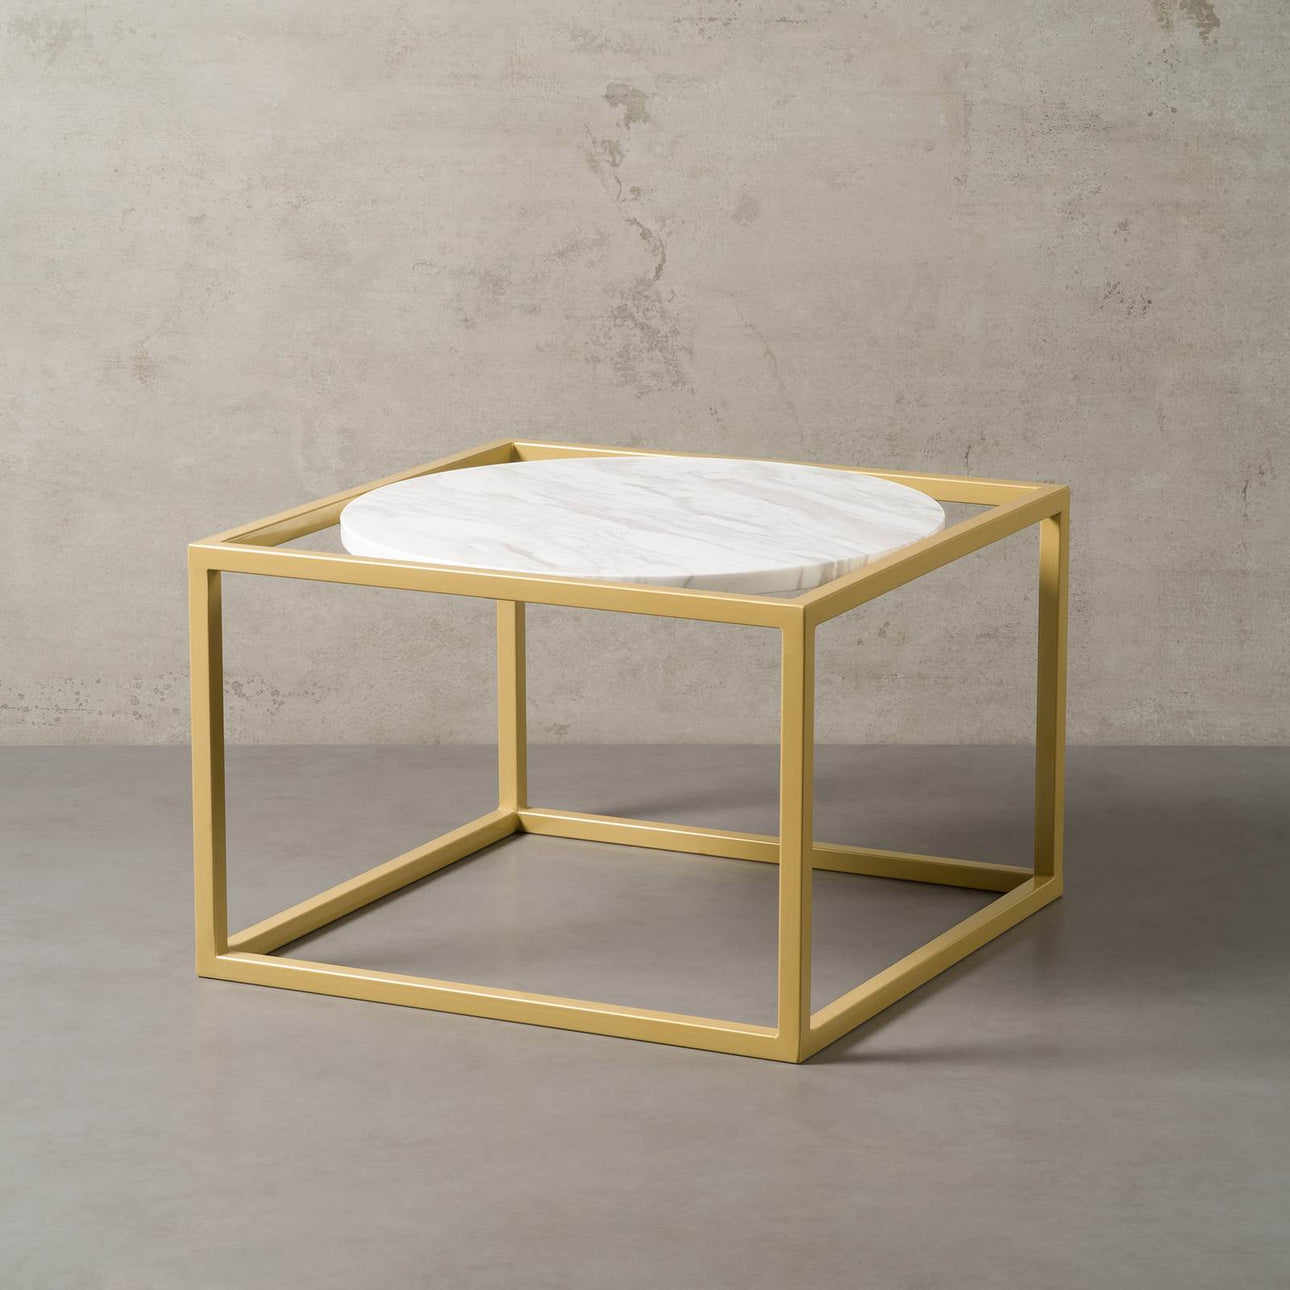 Palermo marble coffee table